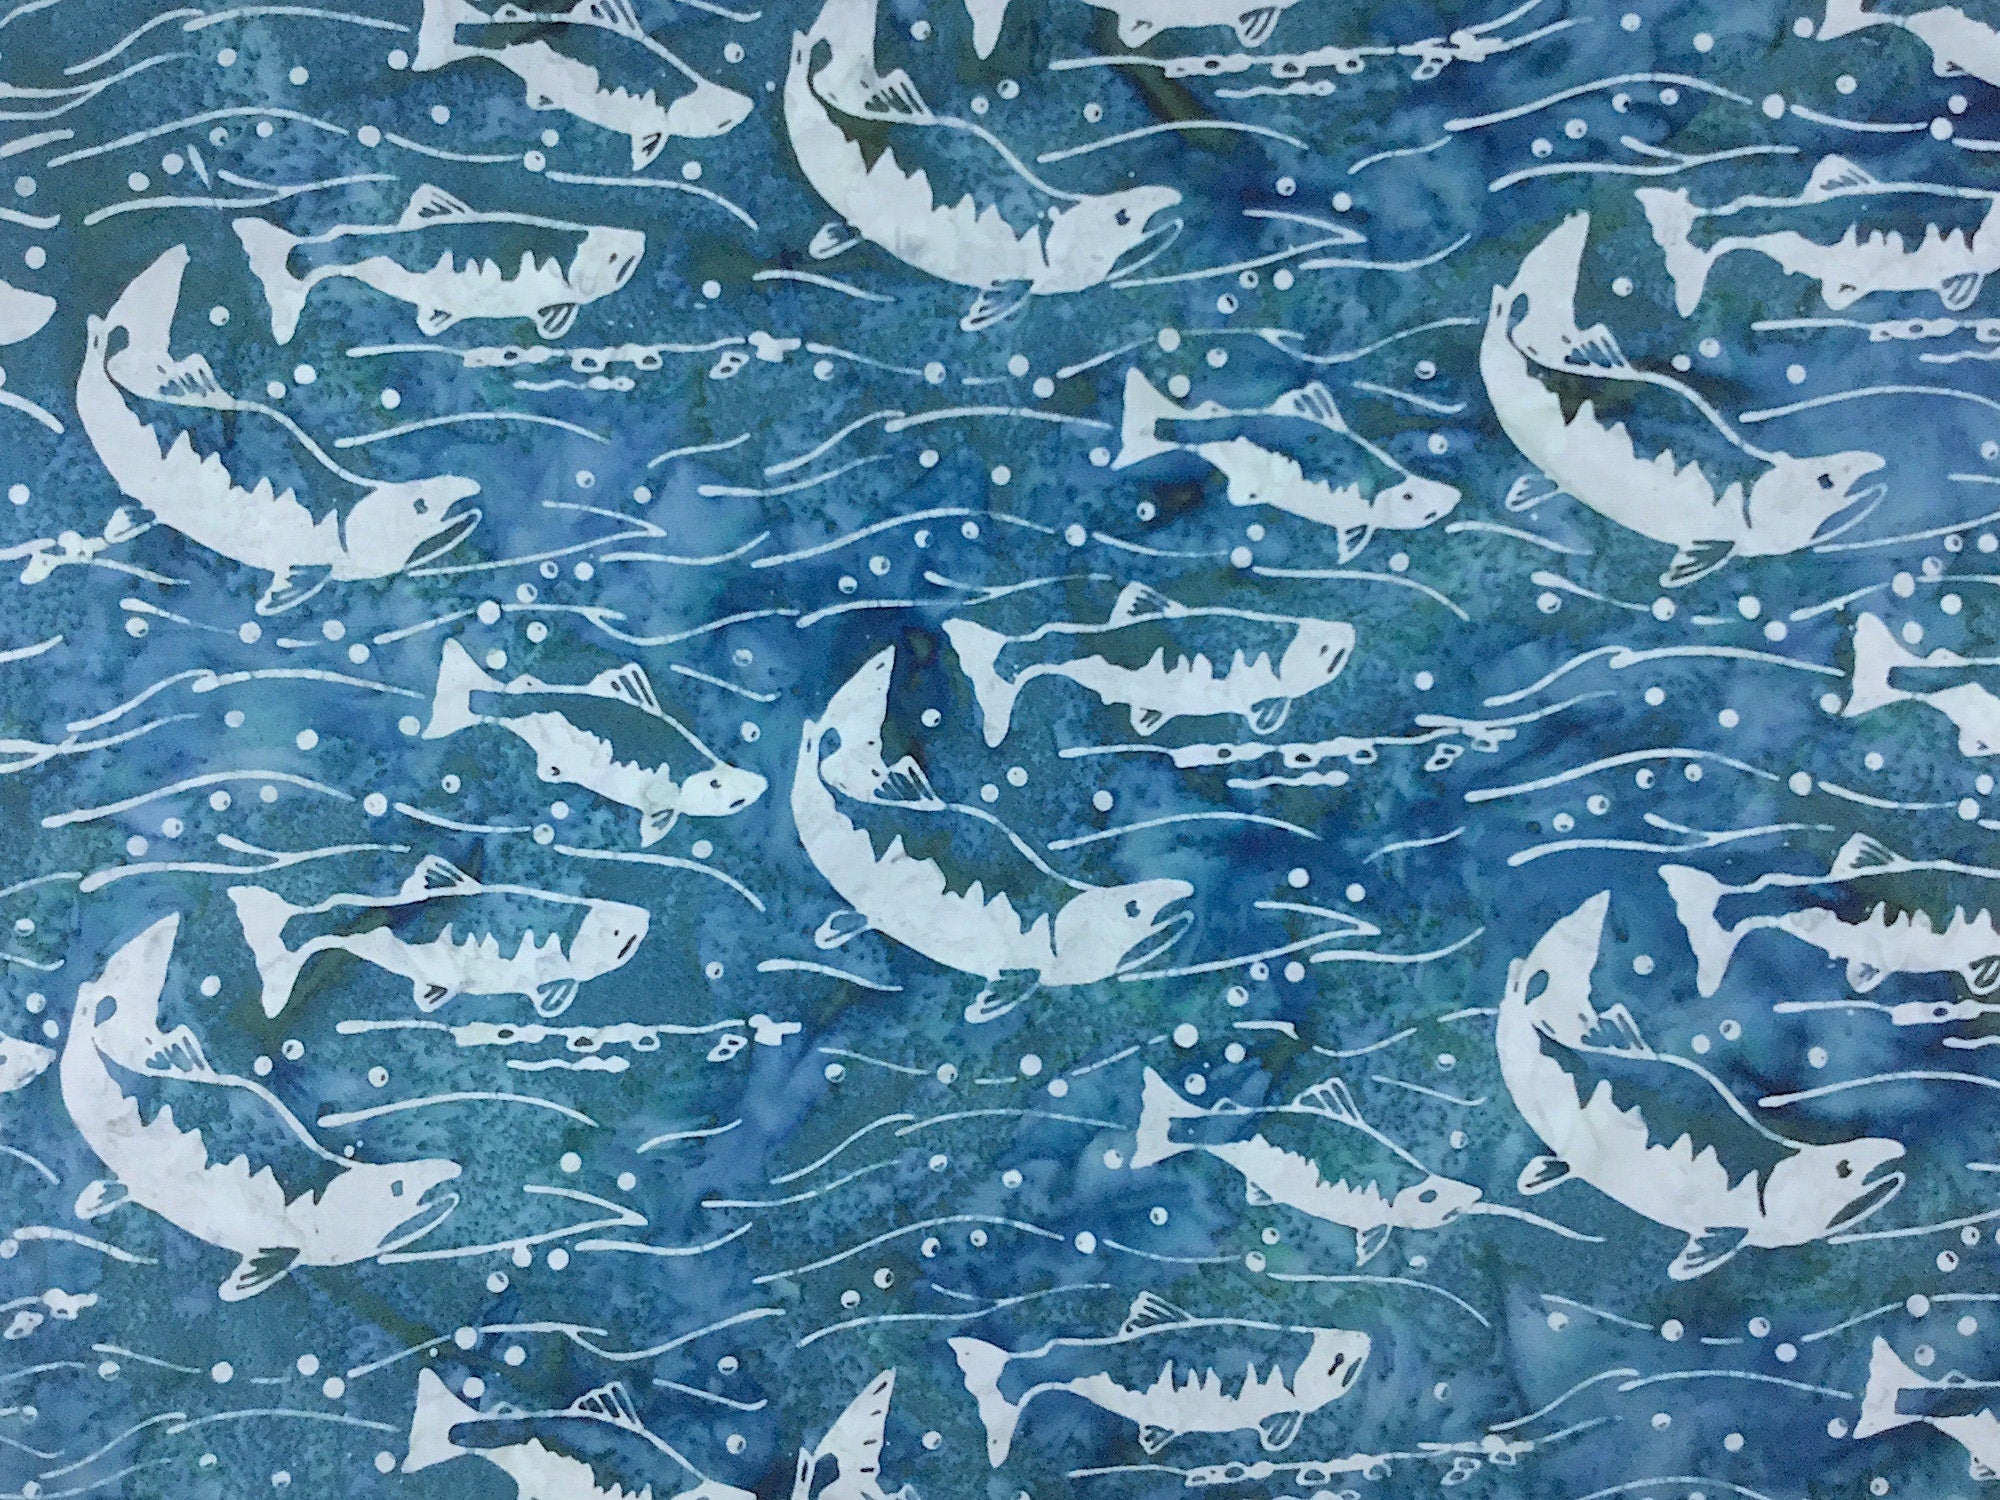 This Green fabric is called Splash and is covered with fish.